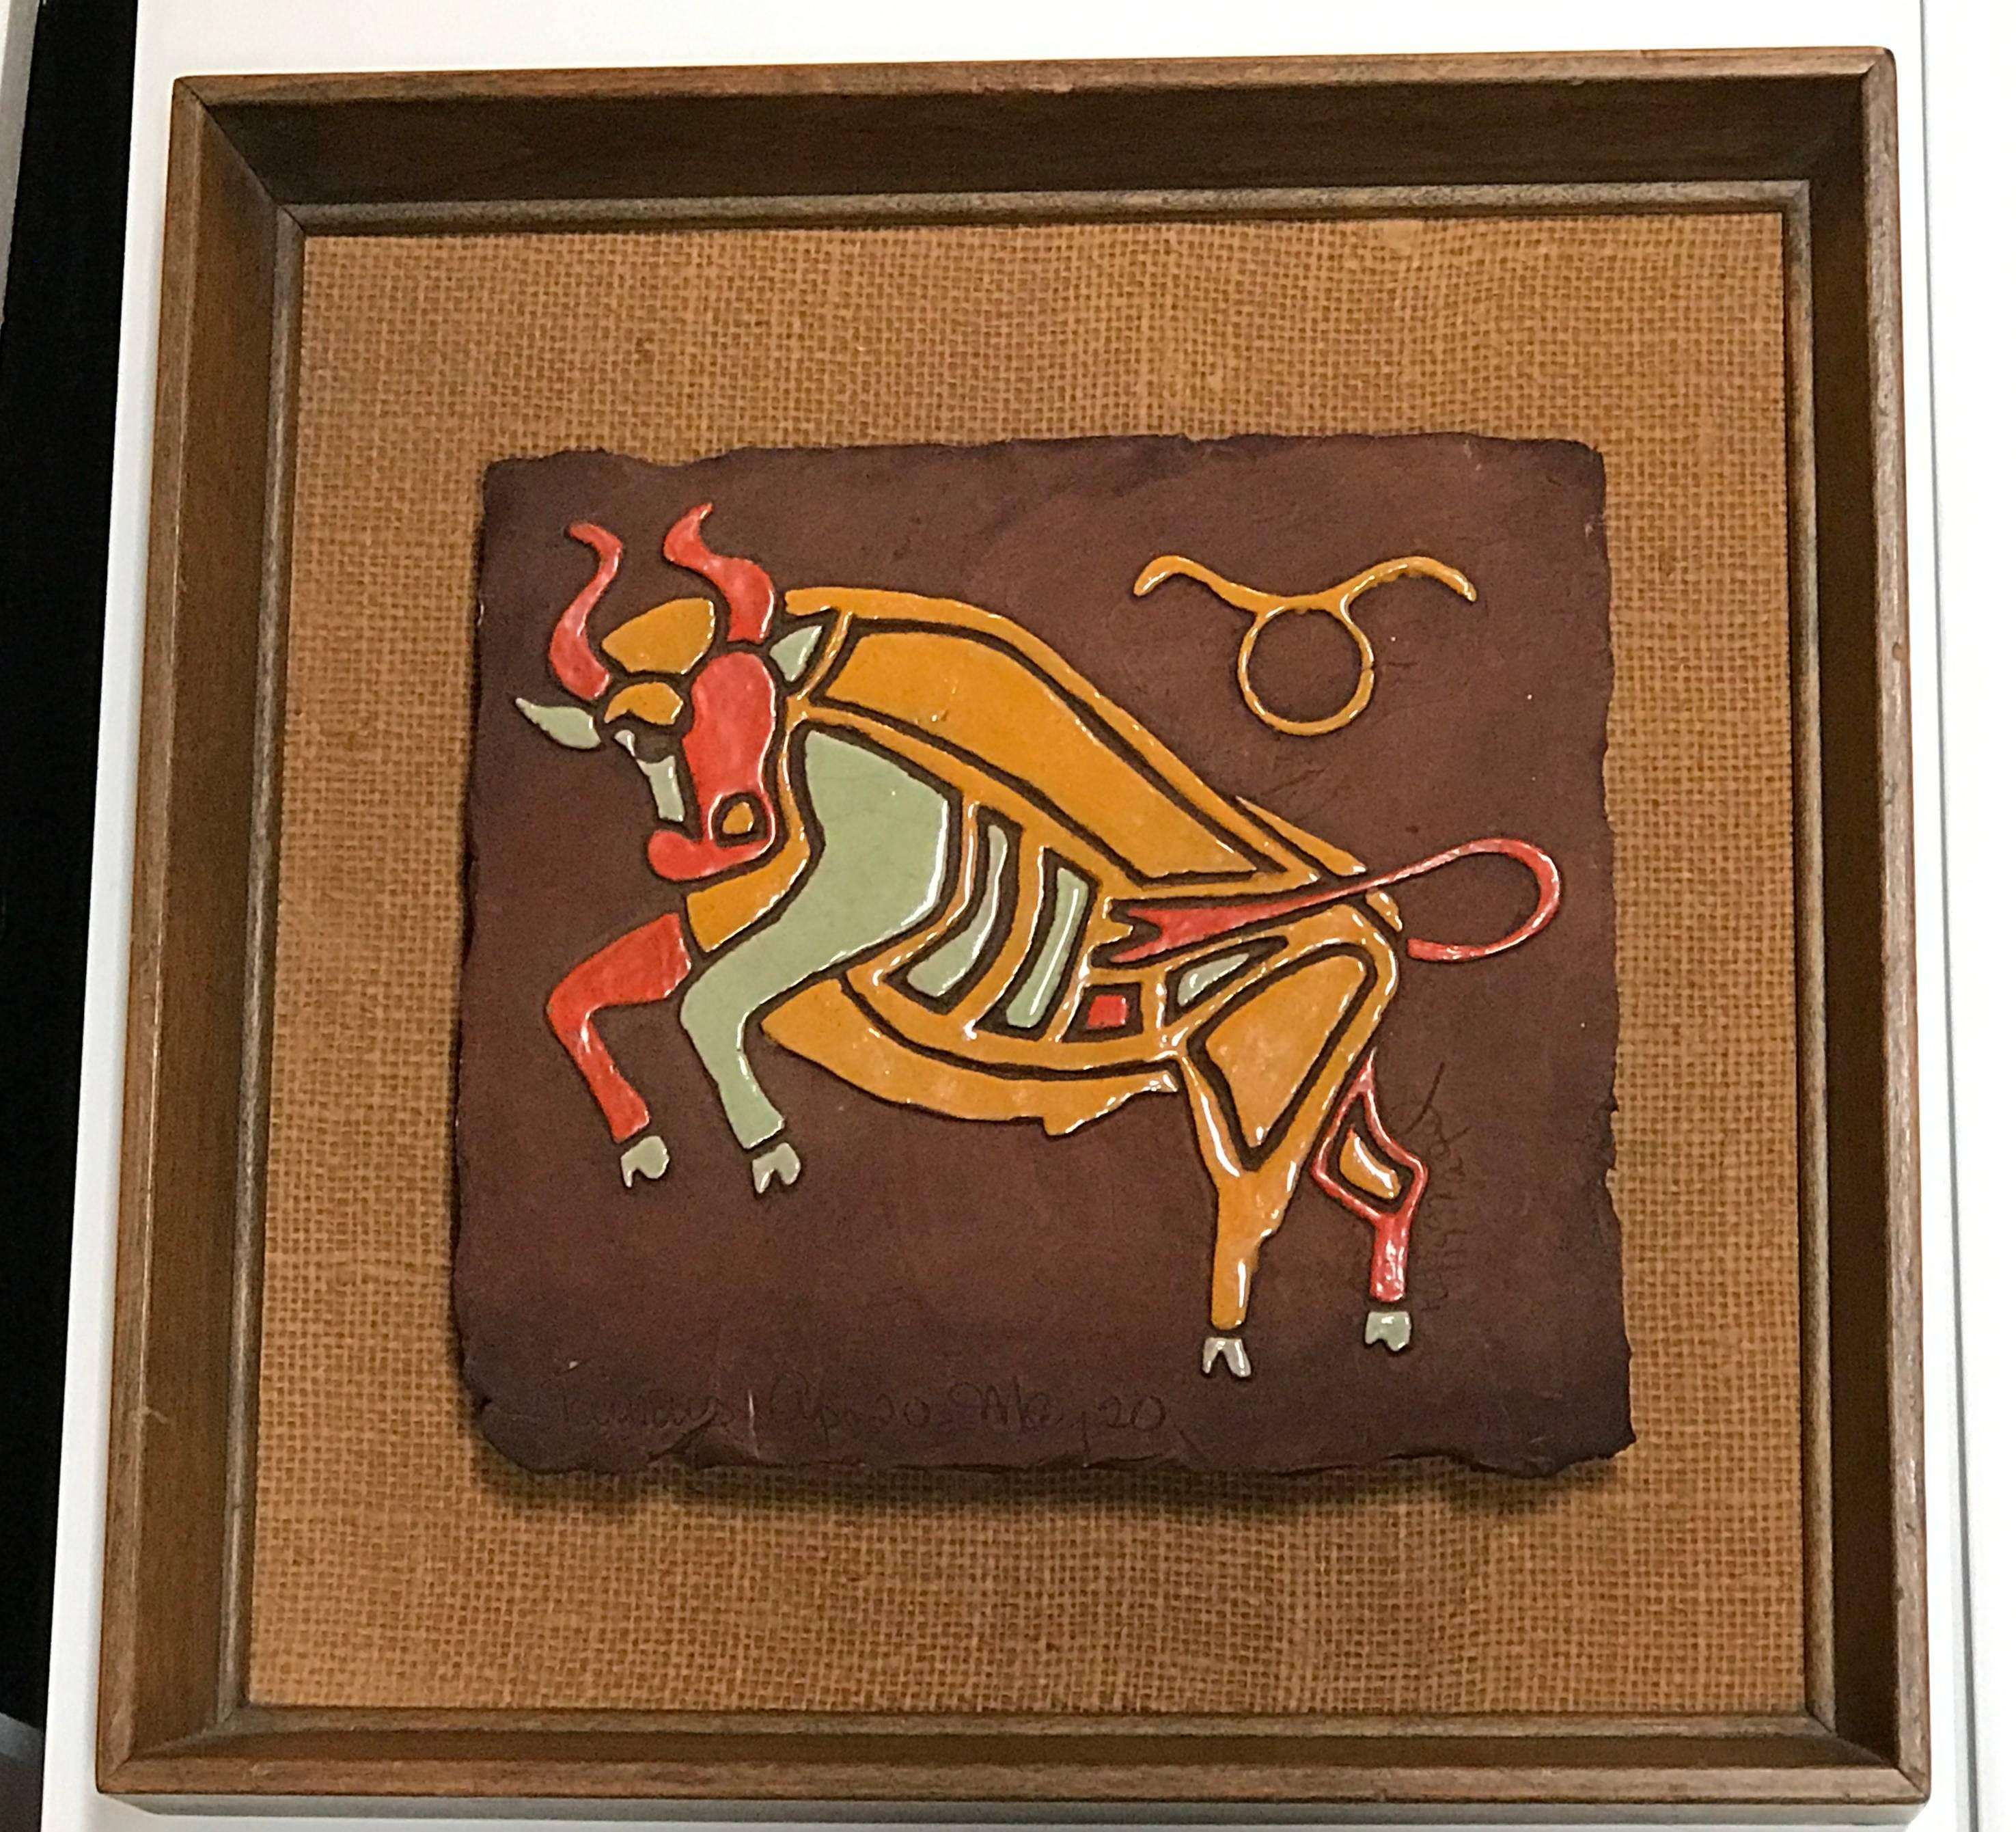 Taurus Astrological Sign Tile by Peggy Nagel California Pottery 1